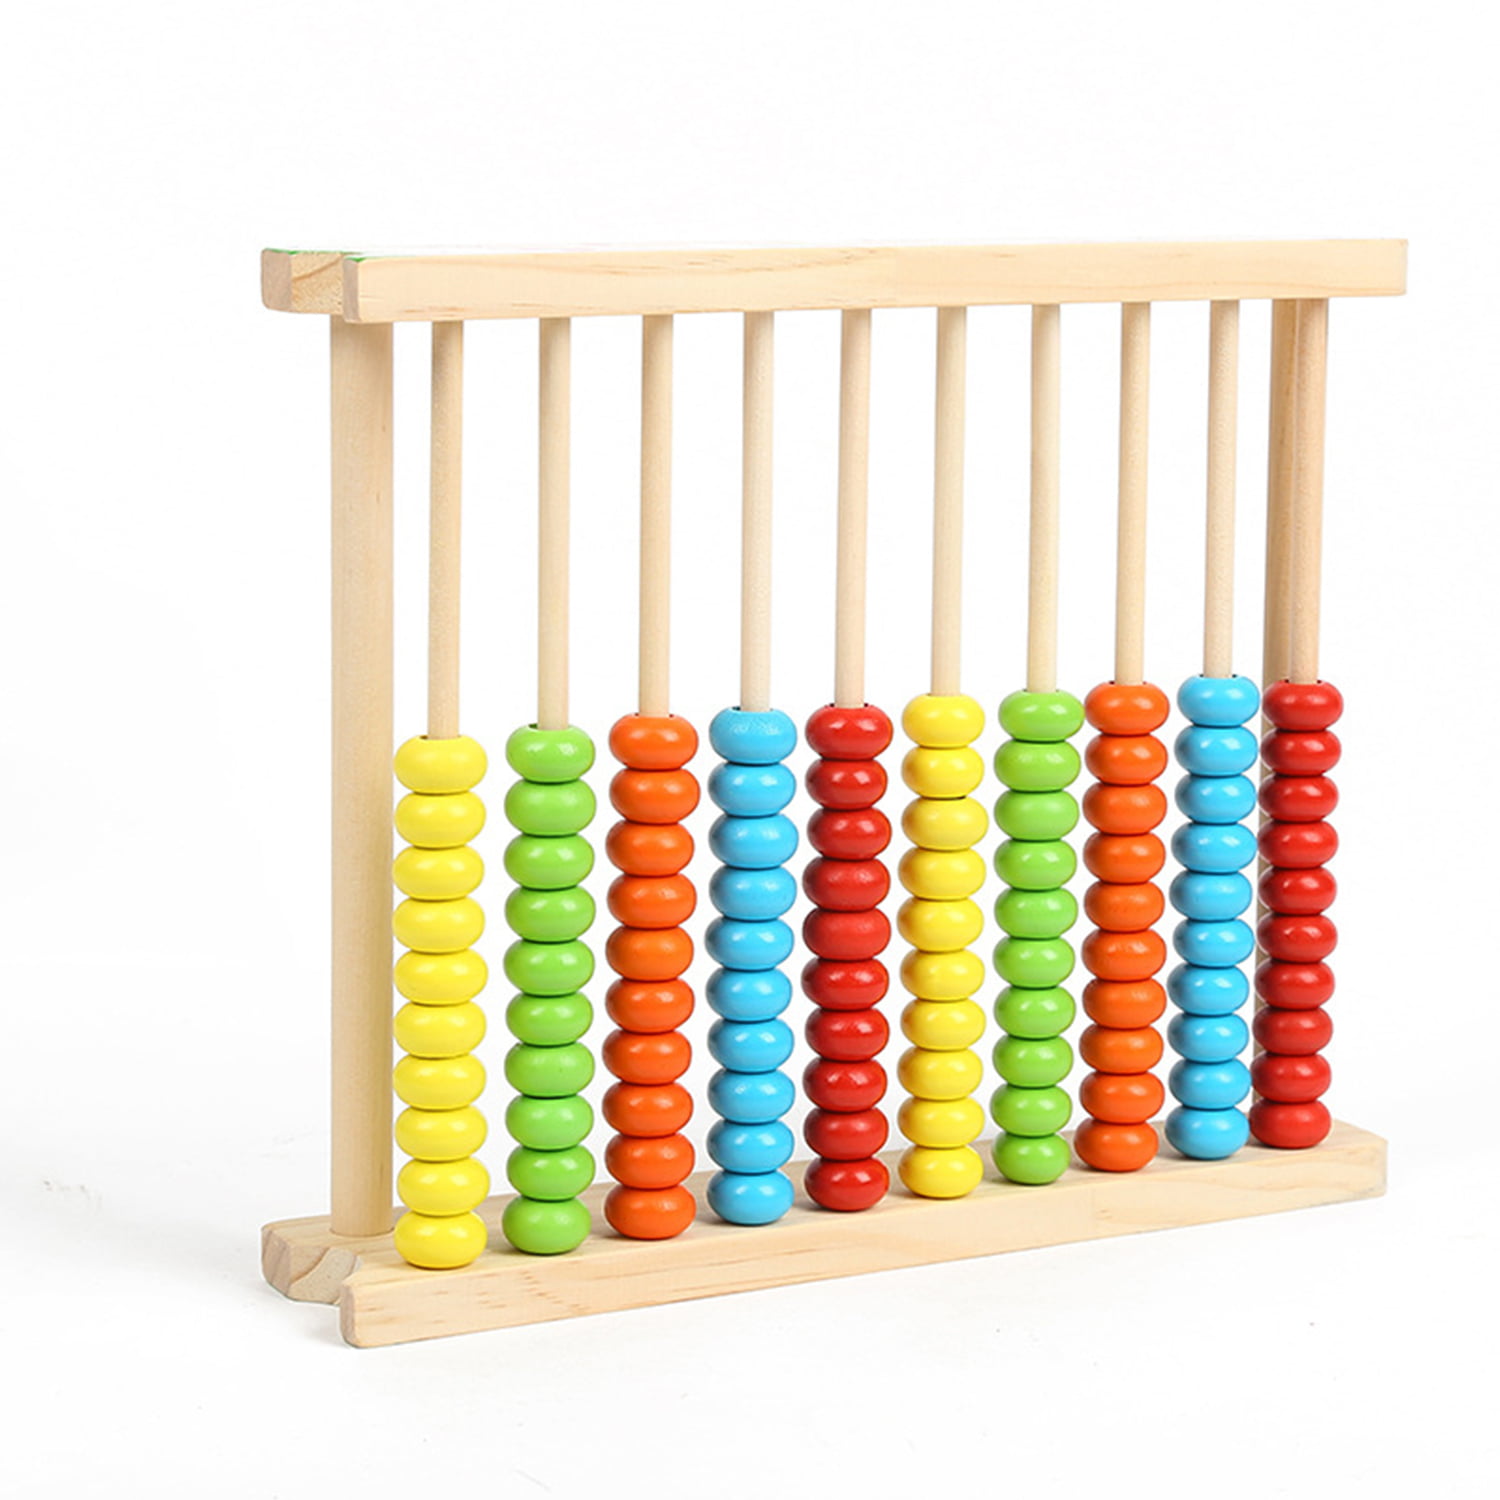 Wooden Children's Counting Bead Abacus Educational Frame Maths Aids Toy D 